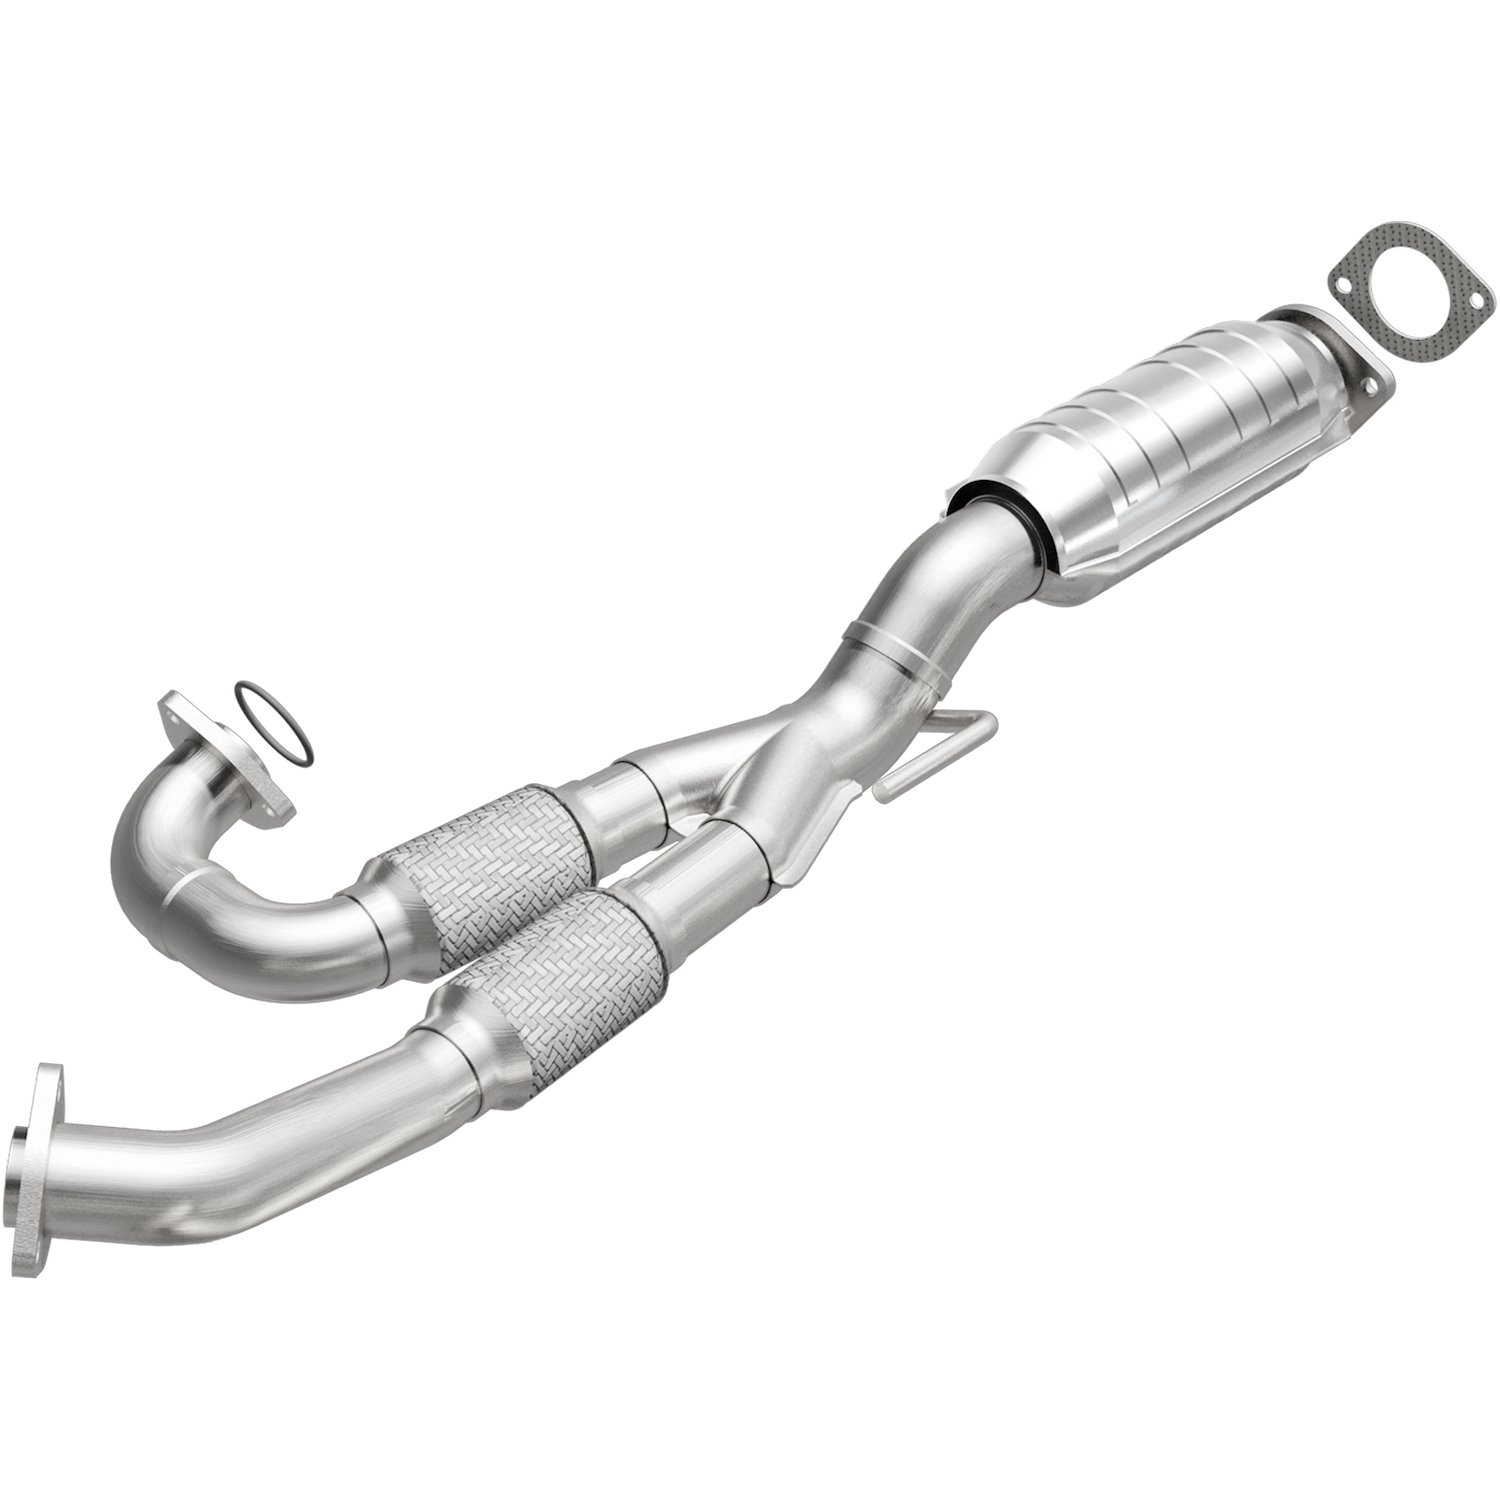 2002-2005 Nissan Altima OEM Grade Federal / EPA Compliant Direct-Fit Catalytic Converter